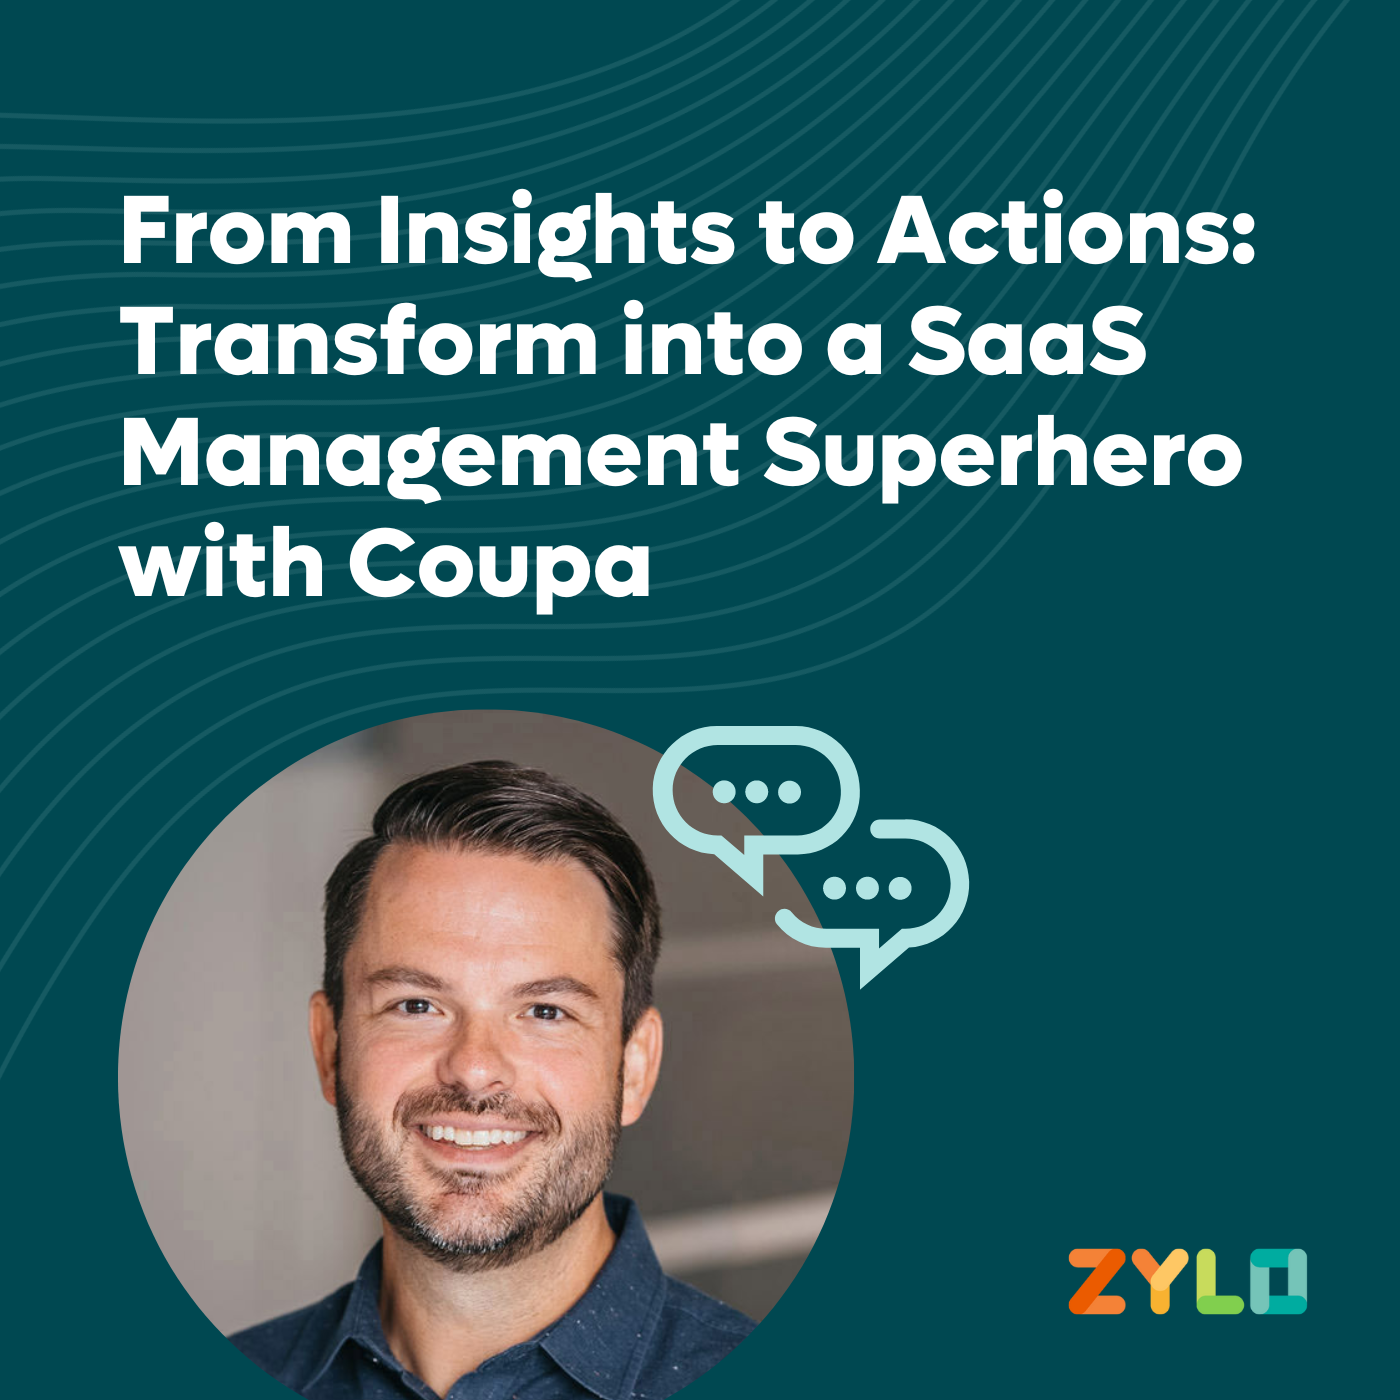 From Insights to Actions: Transform into a SaaS Management Superhero